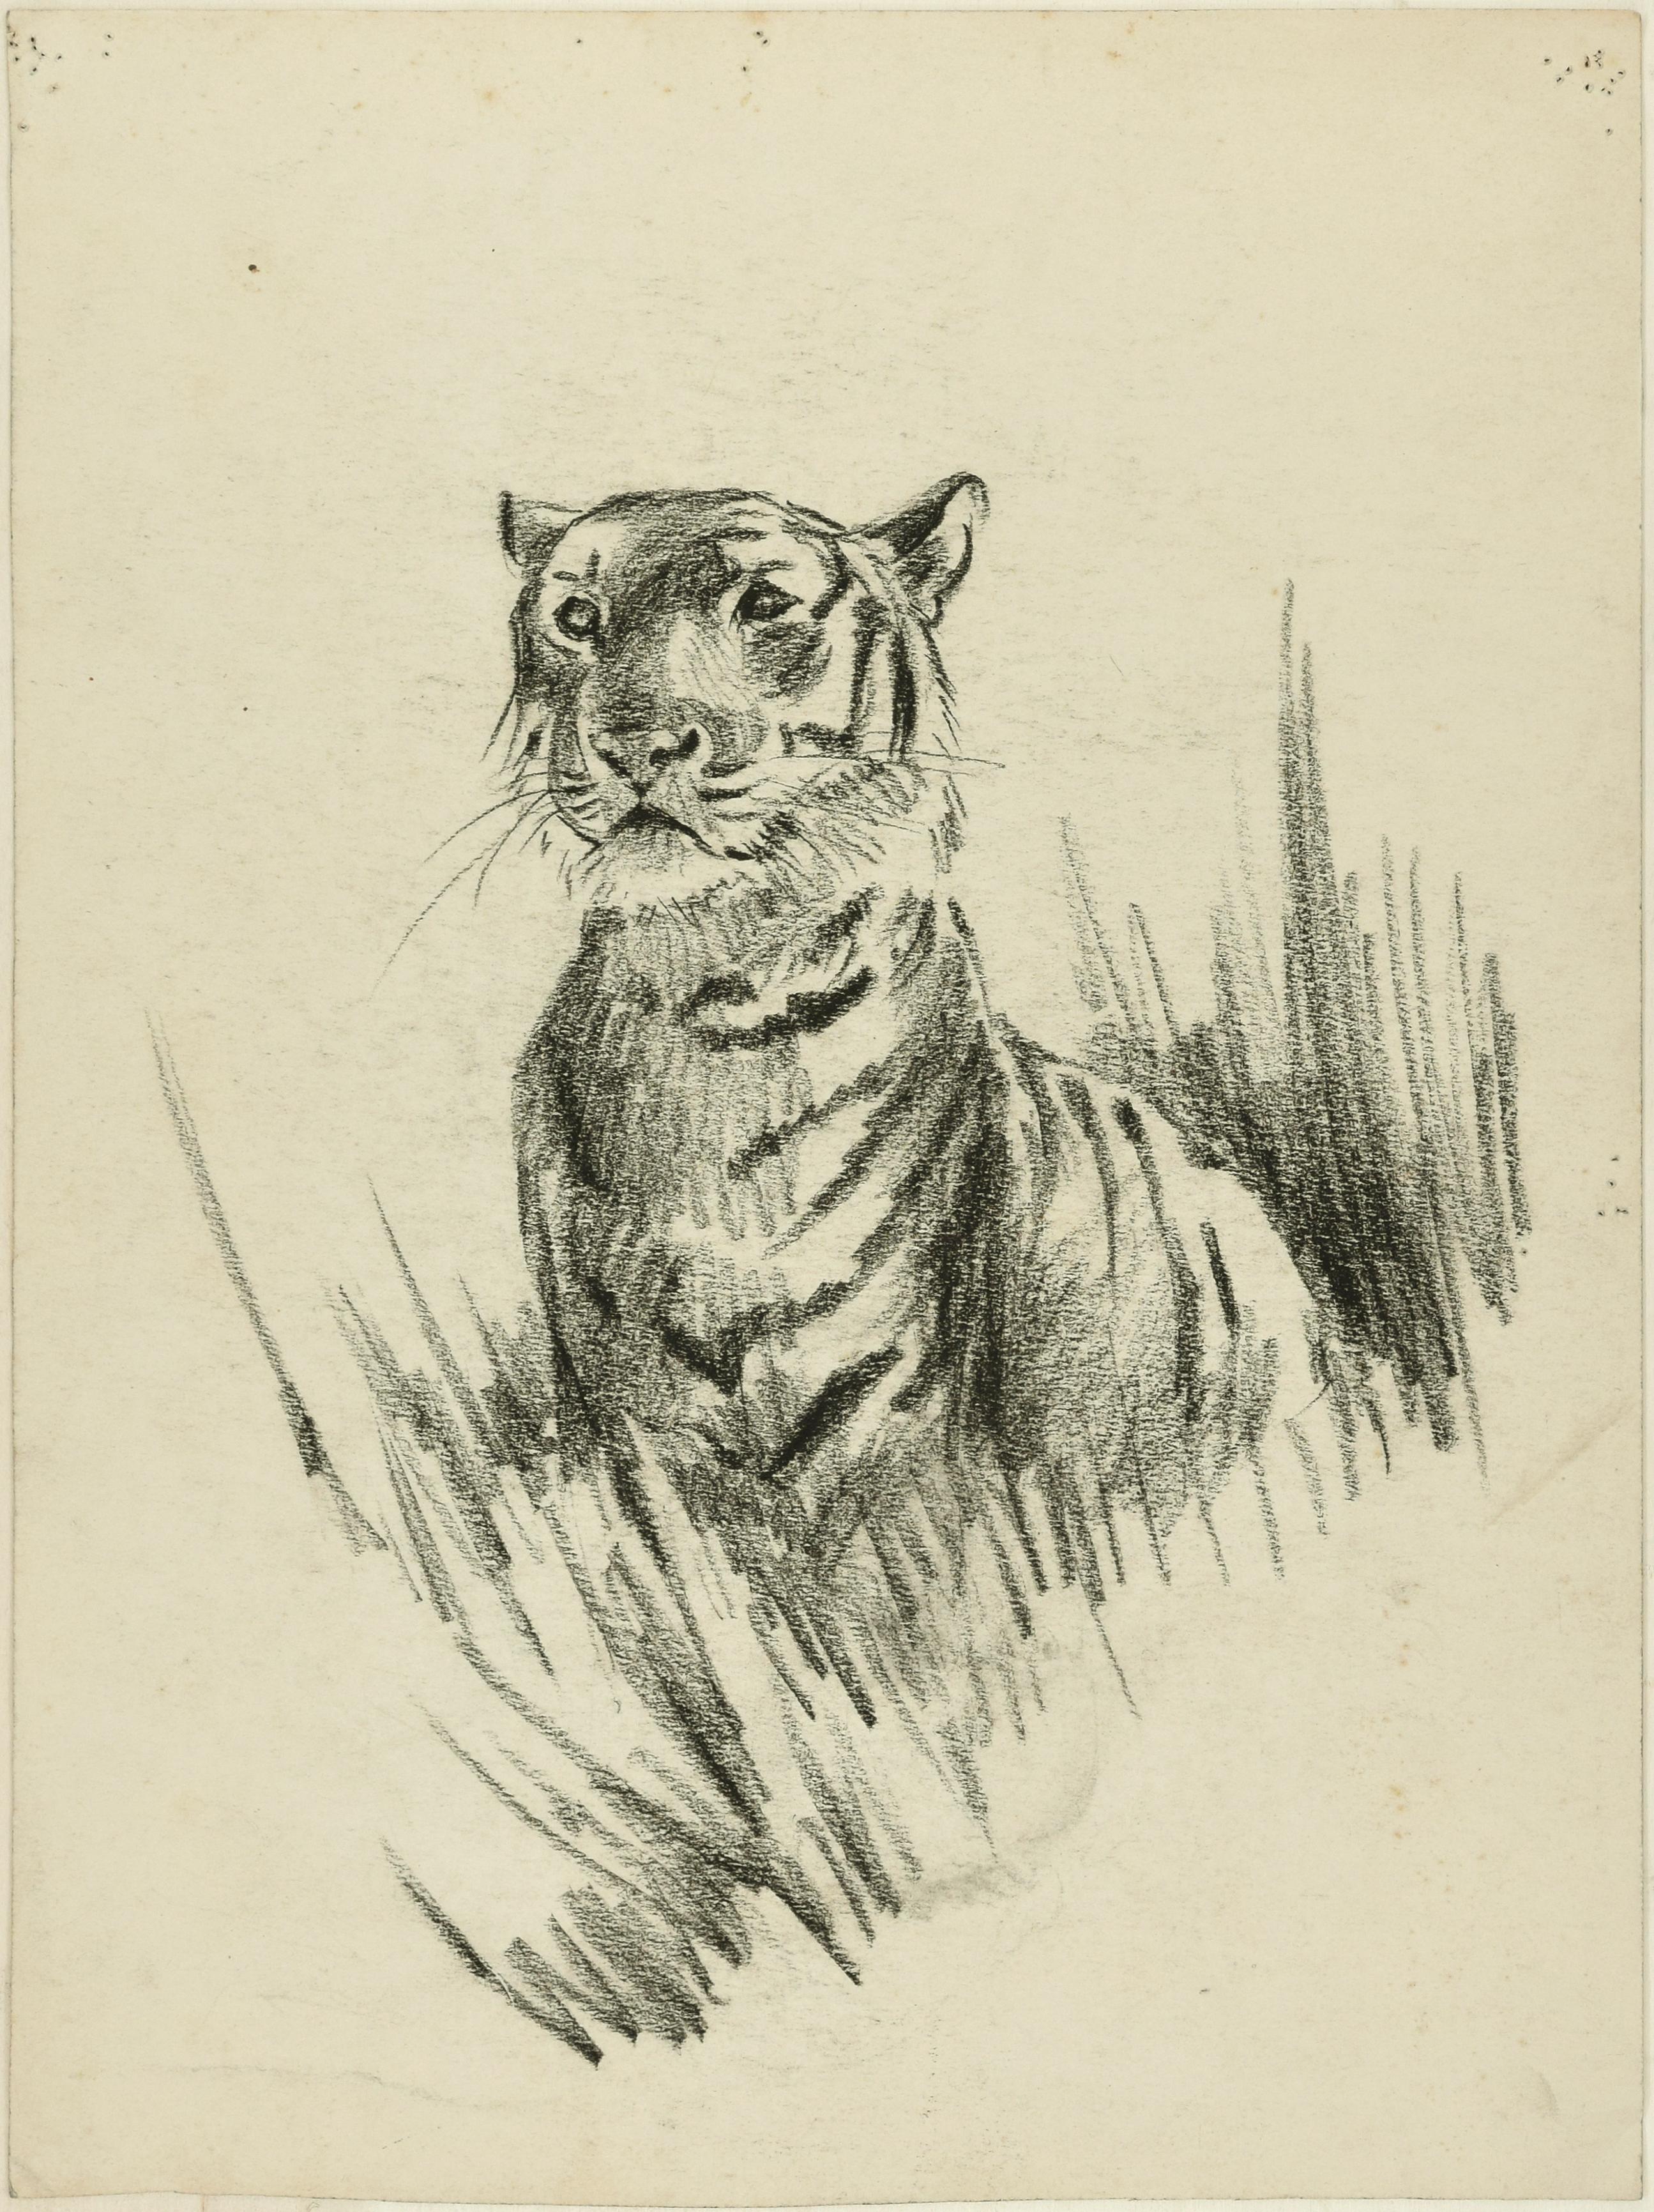 Head of Lion and Tiger - Original Pencil Drawing by Willy Lorenz - 1950s - Art by Wilhelm Lorenz